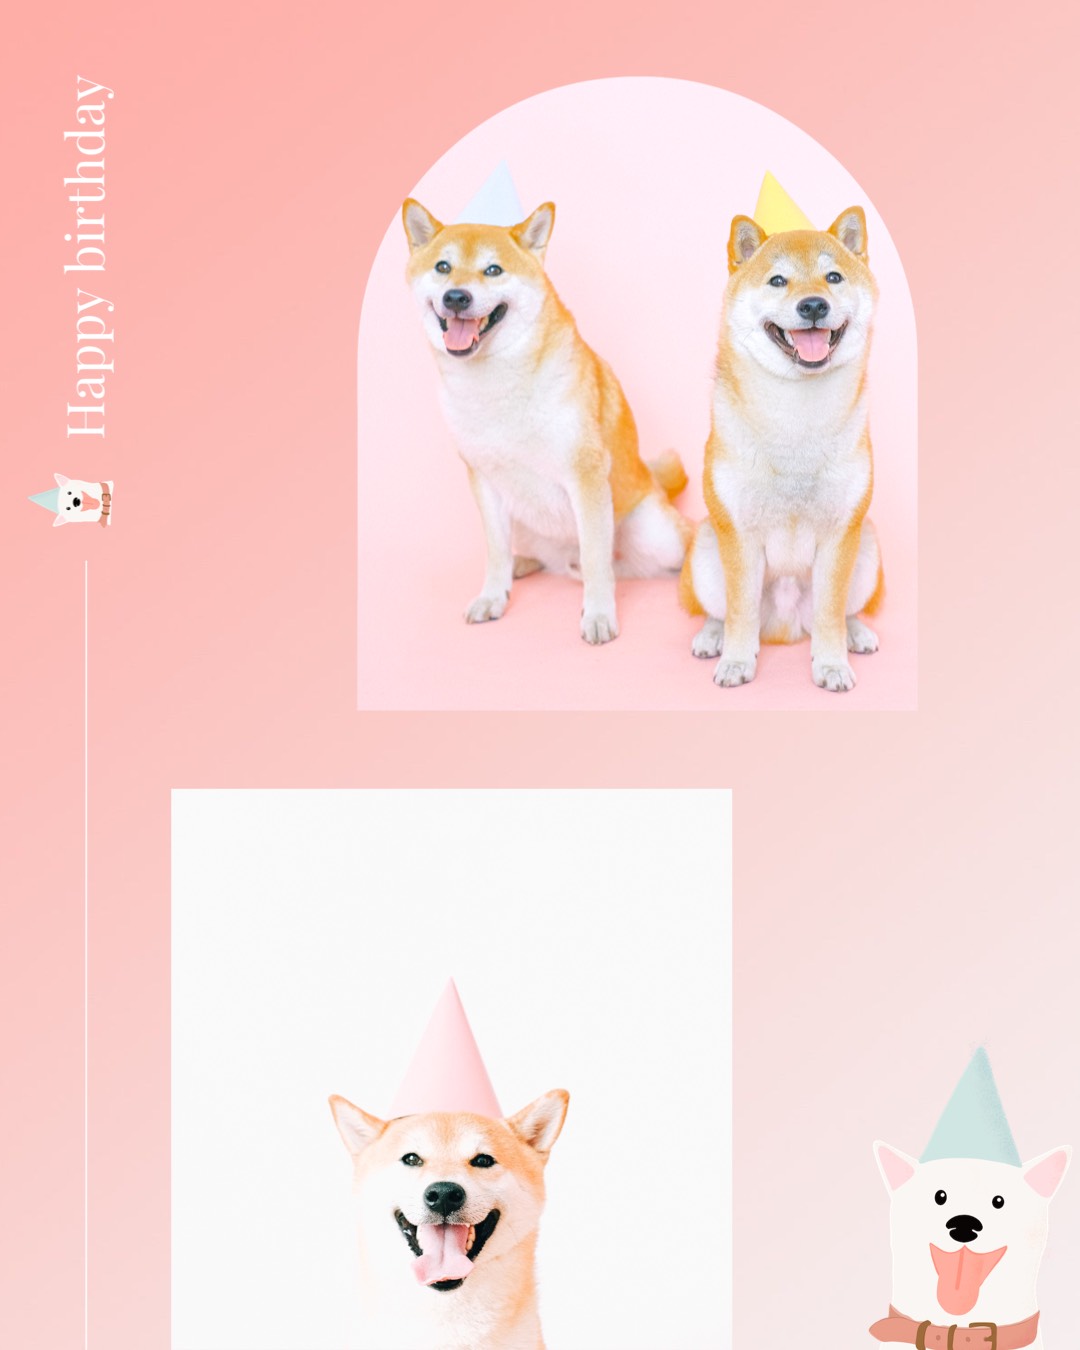 A Dog Wearing A Party Hat And Another Dog Wearing A Party Hat Pets Template